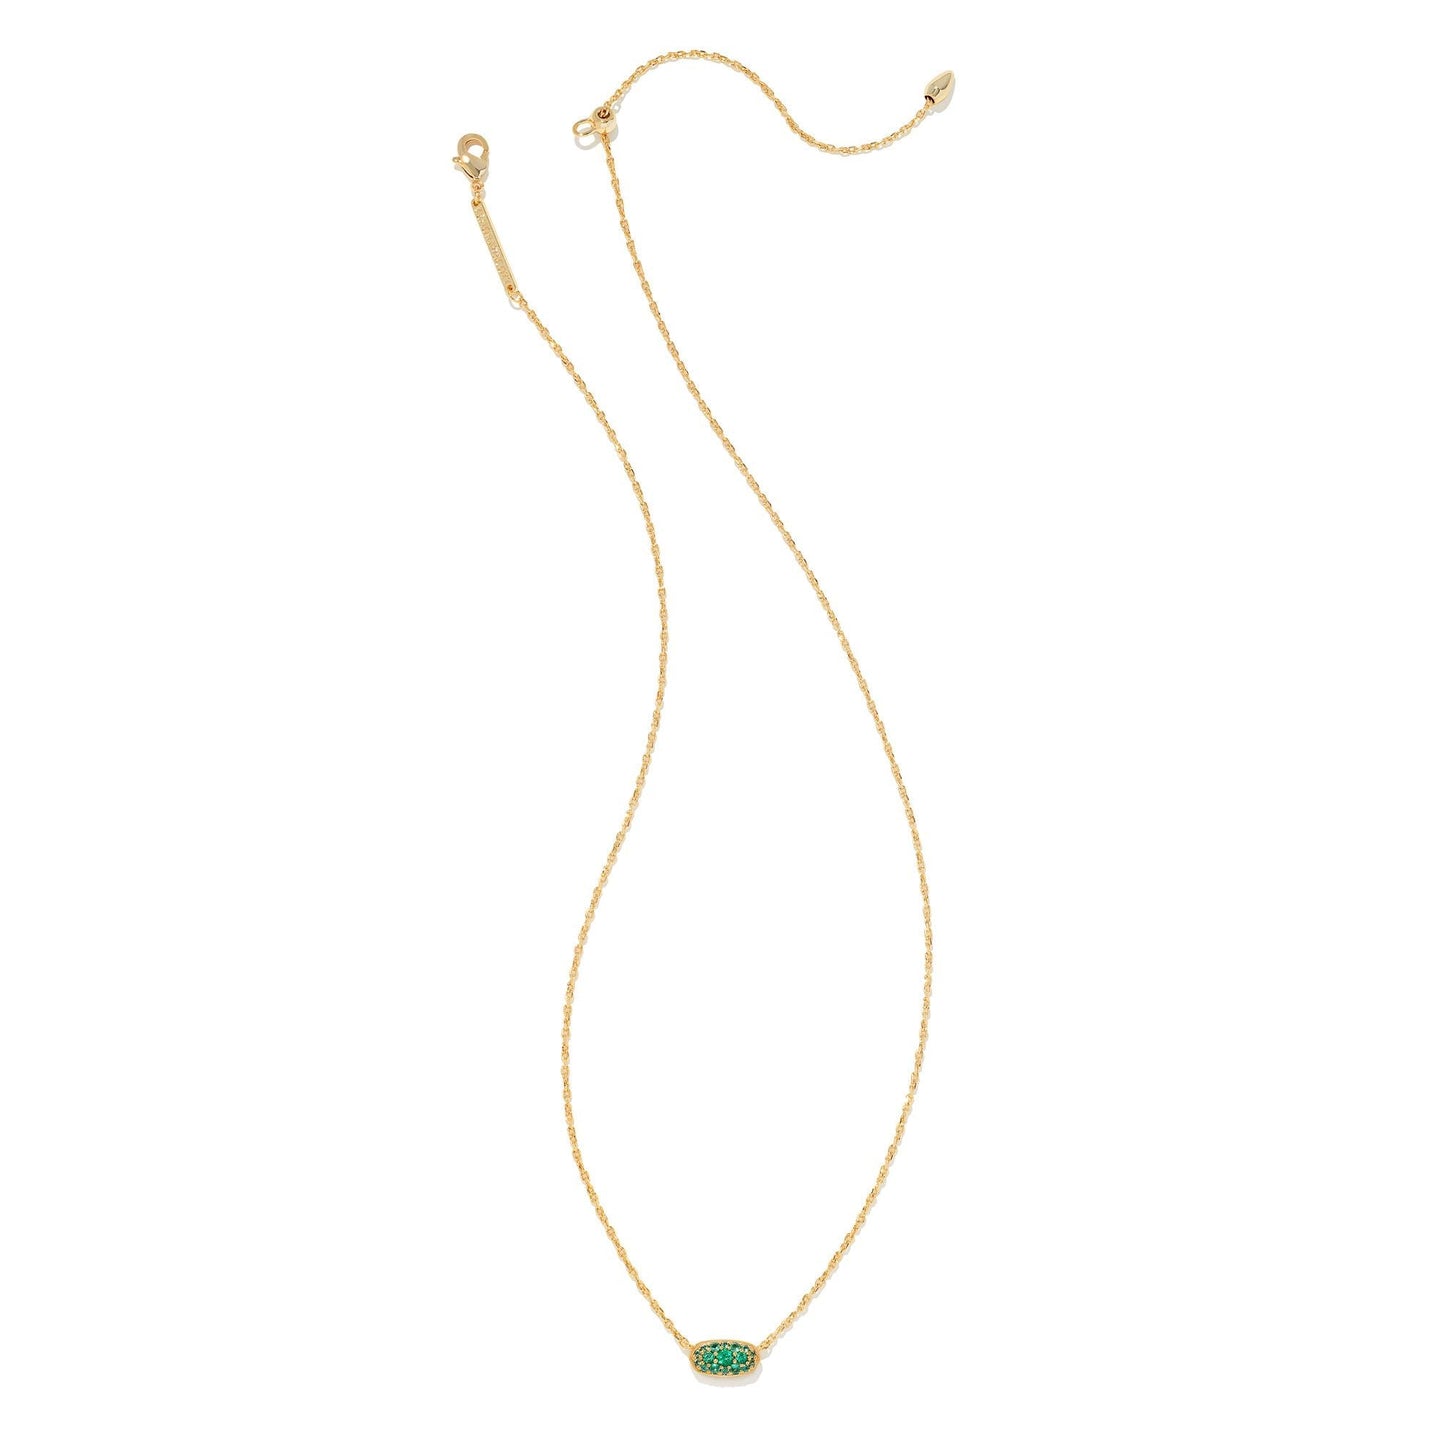 Grayson Crystal Pendant Necklace in Gold Emerald